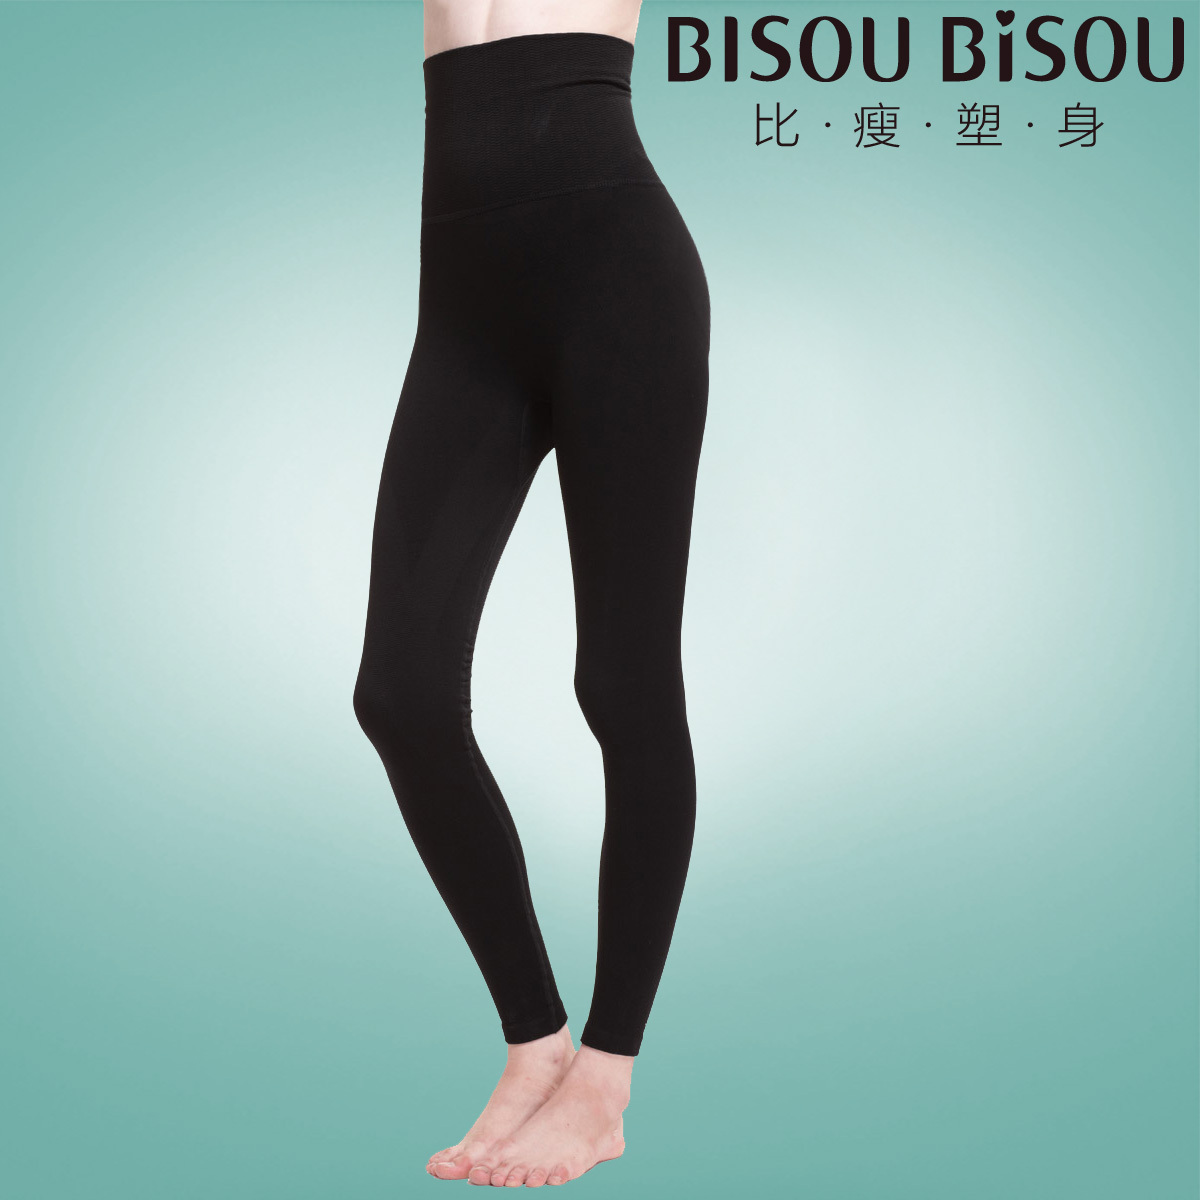 Bisou bisou high waist powerful abdomen drawing tiebelt butt-lifting body shaping pants ankle length trousers thick